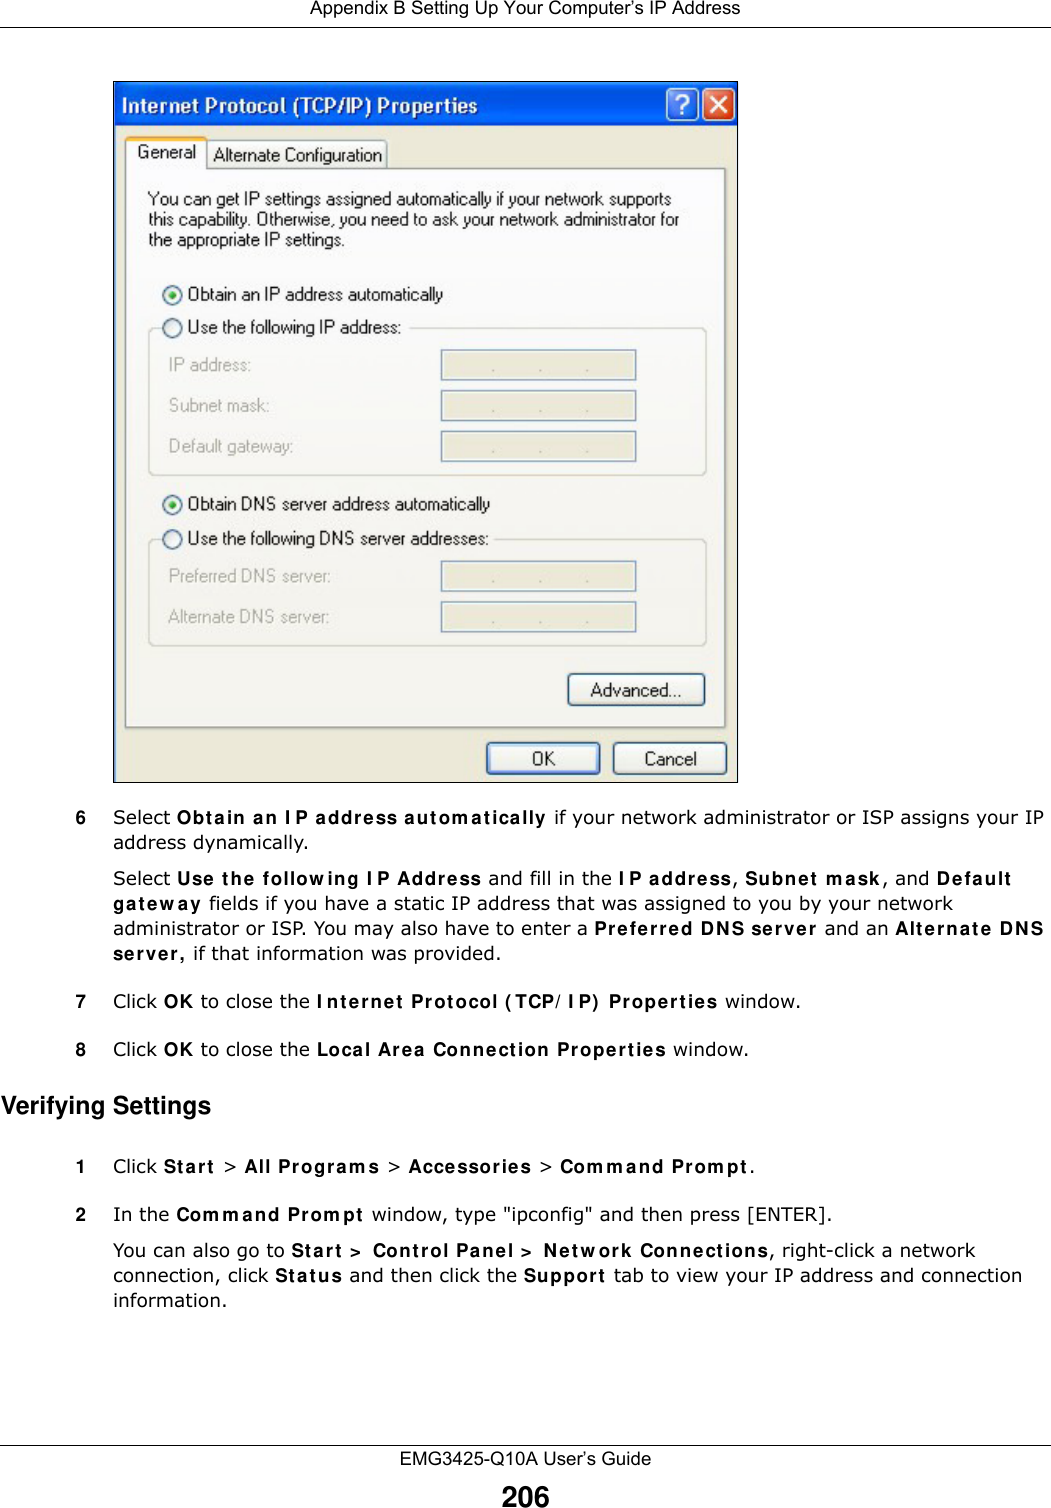 Appendix B Setting Up Your Computer’s IP AddressEMG3425-Q10A User’s Guide2066Select Obt a in a n I P a ddre ss a ut om a t ically if your network administrator or ISP assigns your IP address dynamically.Select Use t he follow ing I P Addr ess and fill in the I P address, Subne t  m a sk , and D efault  ga t e w a y  fields if you have a static IP address that was assigned to you by your network administrator or ISP. You may also have to enter a Pre fer red D N S se r ve r and an Alt e r na t e  DNS server, if that information was provided.7Click OK to close the I nt ernet  Protocol ( TCP/ I P)  Pr ope rtie s window.8Click OK to close the Loca l Ar ea Connect ion Pr ope rtie s window.Verifying Settings1Click St a rt  &gt; All Progra m s &gt; Acce ssories &gt; Com m an d Prom pt .2In the Com m and Prom pt  window, type &quot;ipconfig&quot; and then press [ENTER]. You can also go to St a rt &gt;  Cont r ol Pa nel &gt;  Net w ork Con ne ct ions, right-click a network connection, click St a t u s and then click the Suppor t  tab to view your IP address and connection information.